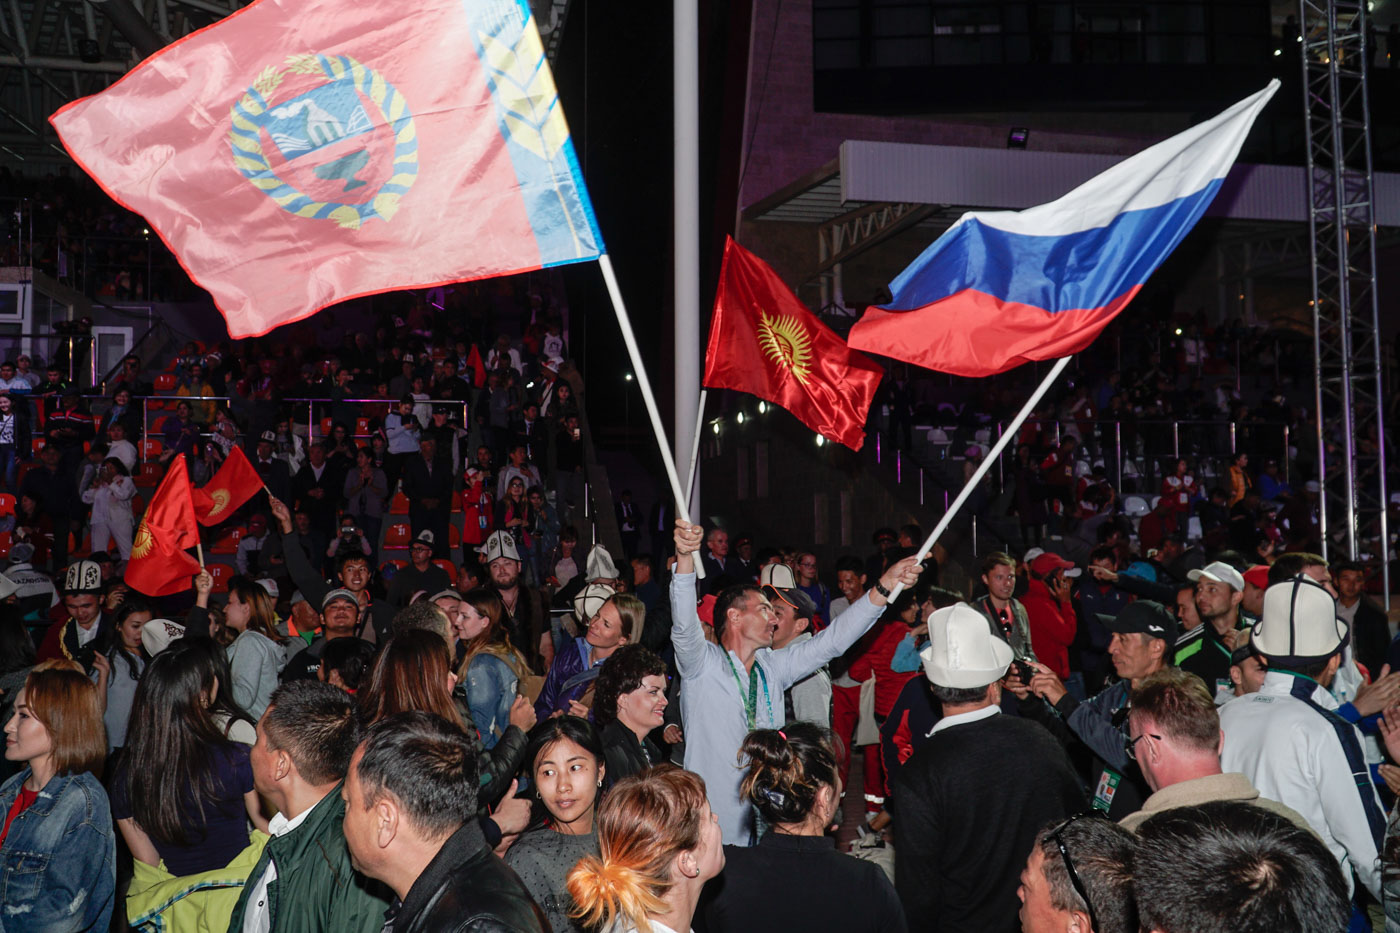 Man waving the flag of Russia and another in the middle of people